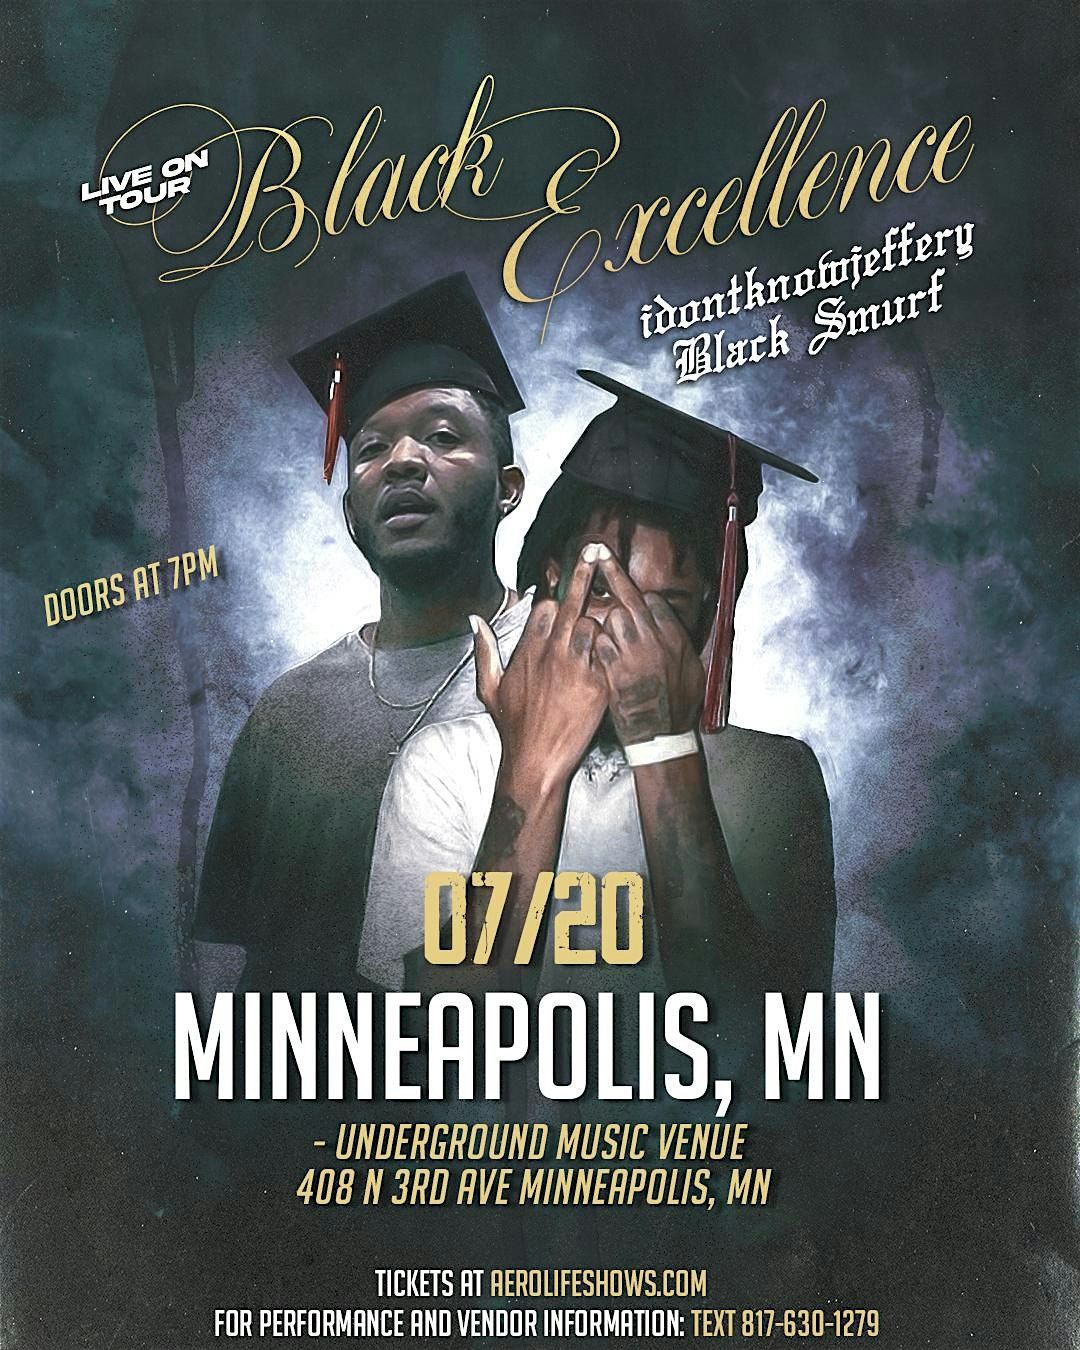 Headgxne and Viscious live in Minneapolis, MN July 20th